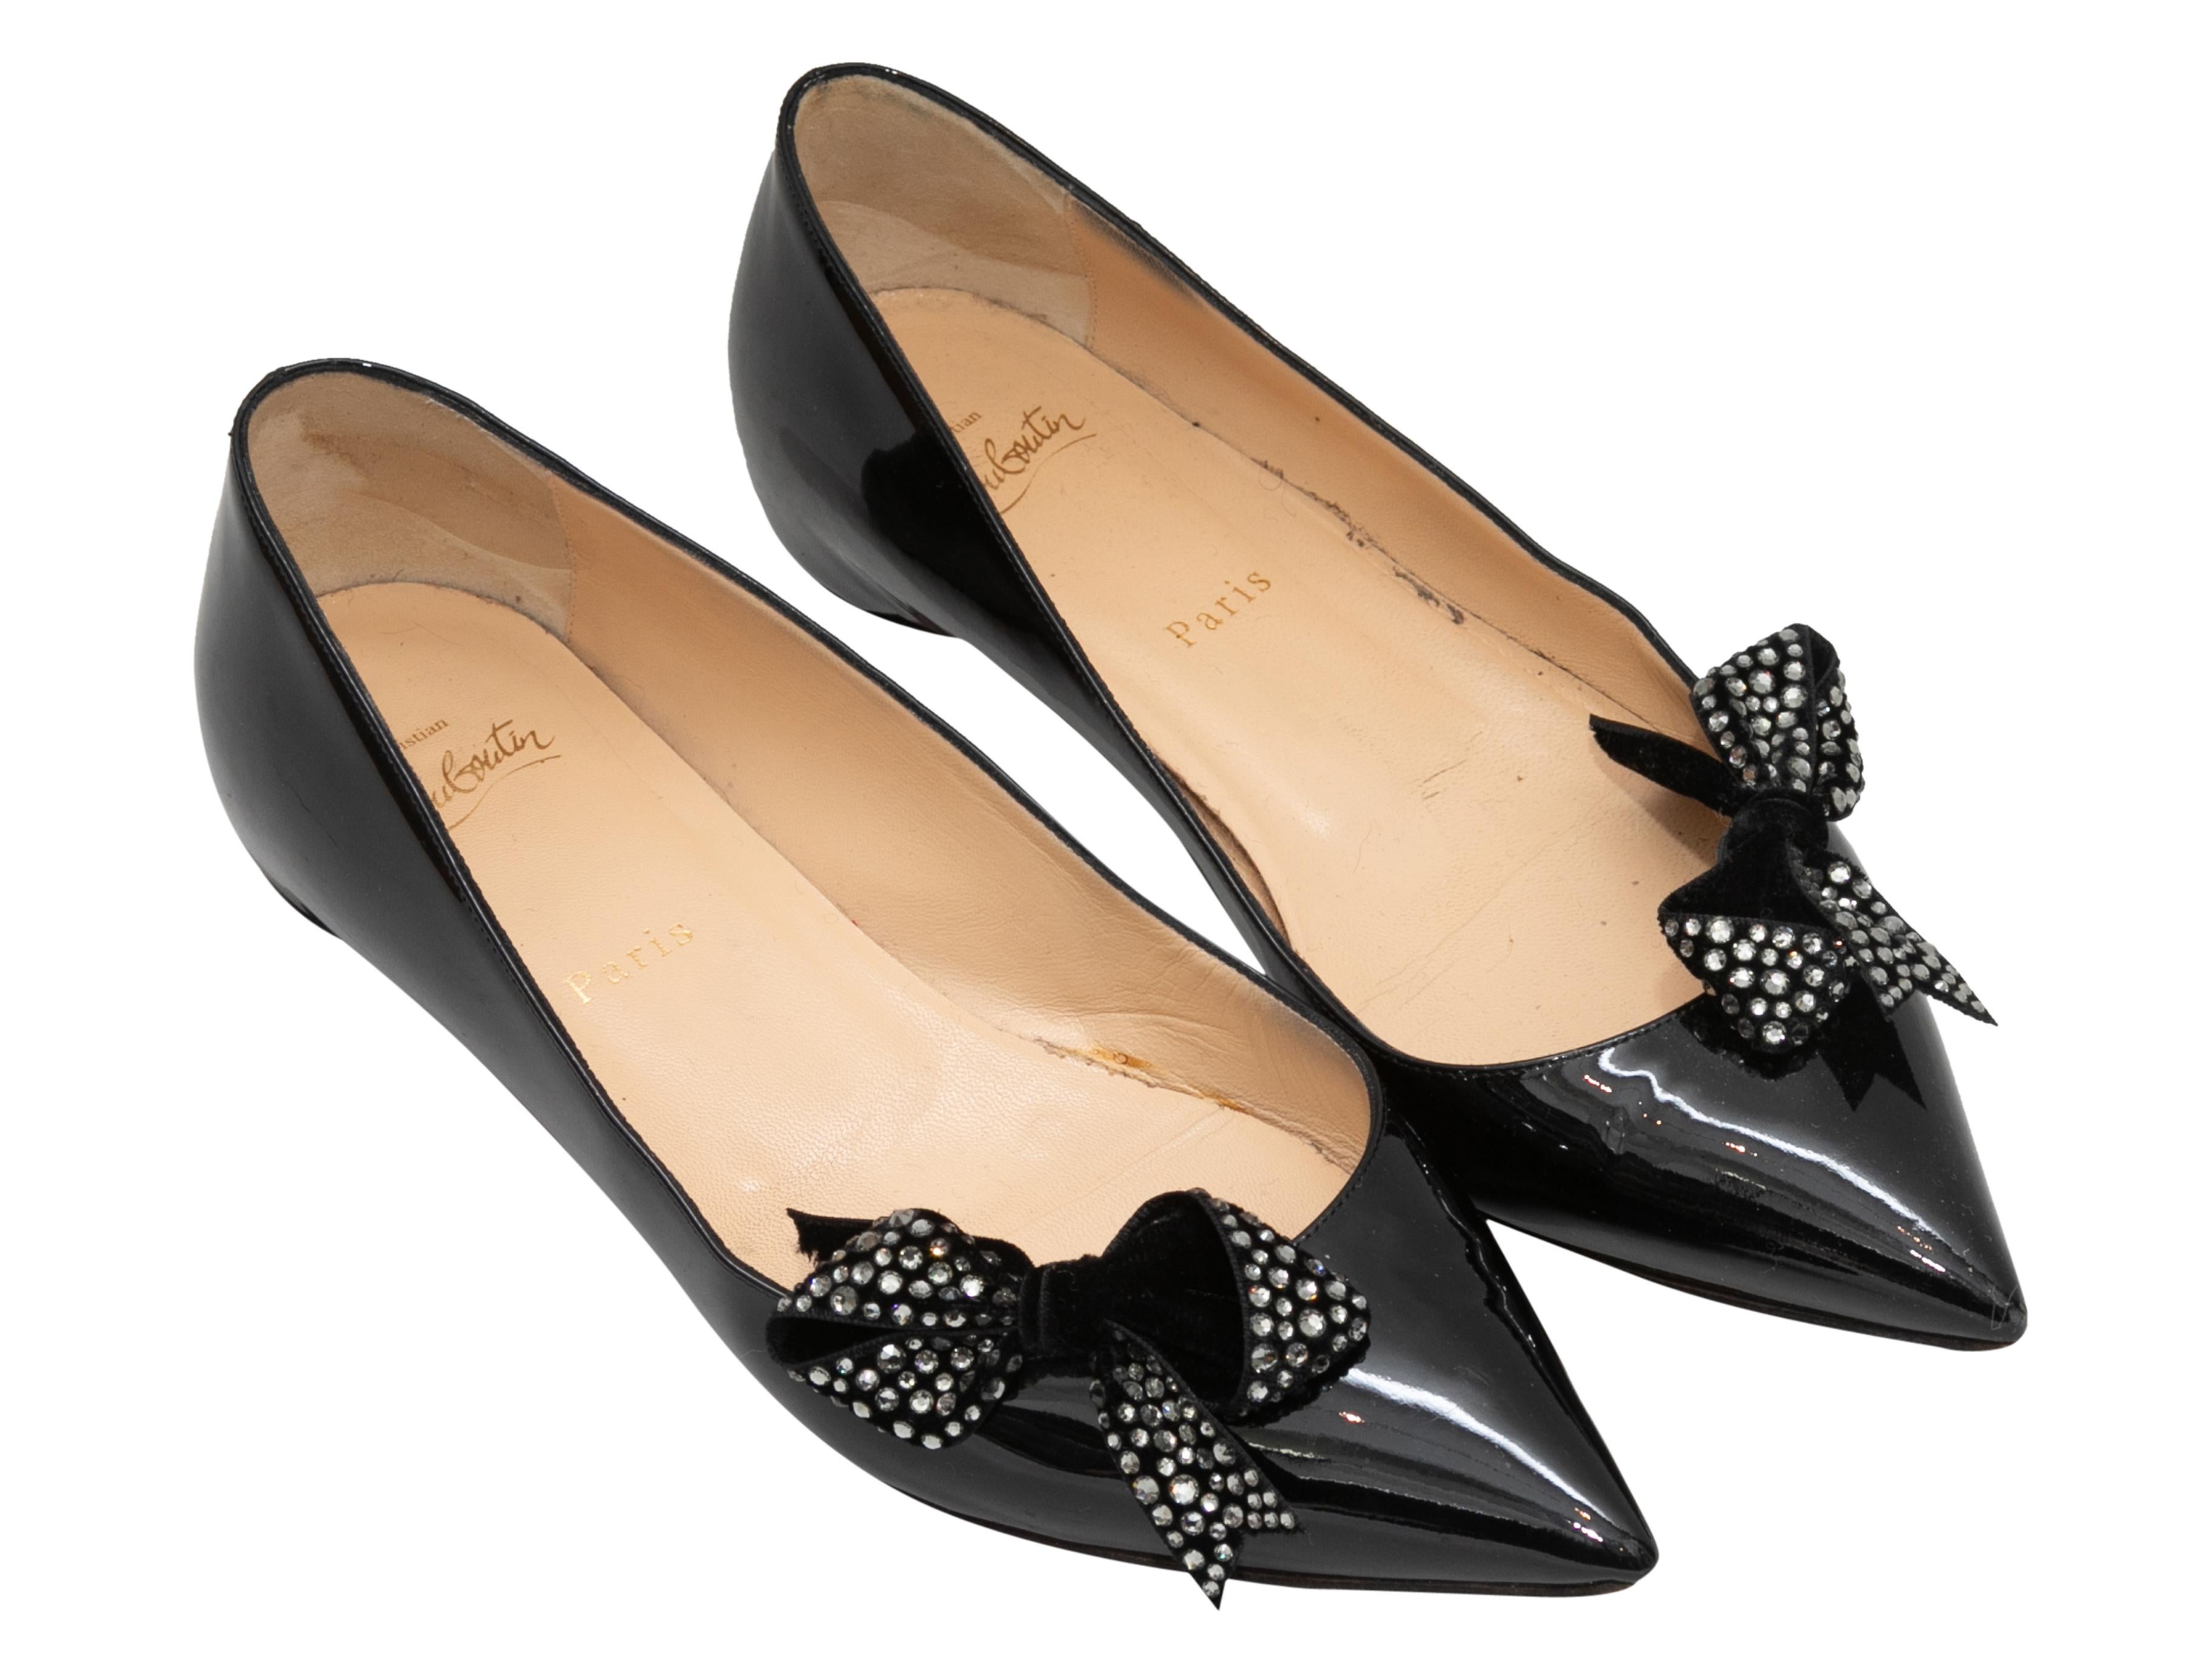 Black patent leather pointed-toe ballet flats by Christian Louboutin. Crystal-embellished bow accents at tops.

Designer Size: 39.5
US Recommended Size: 9.5